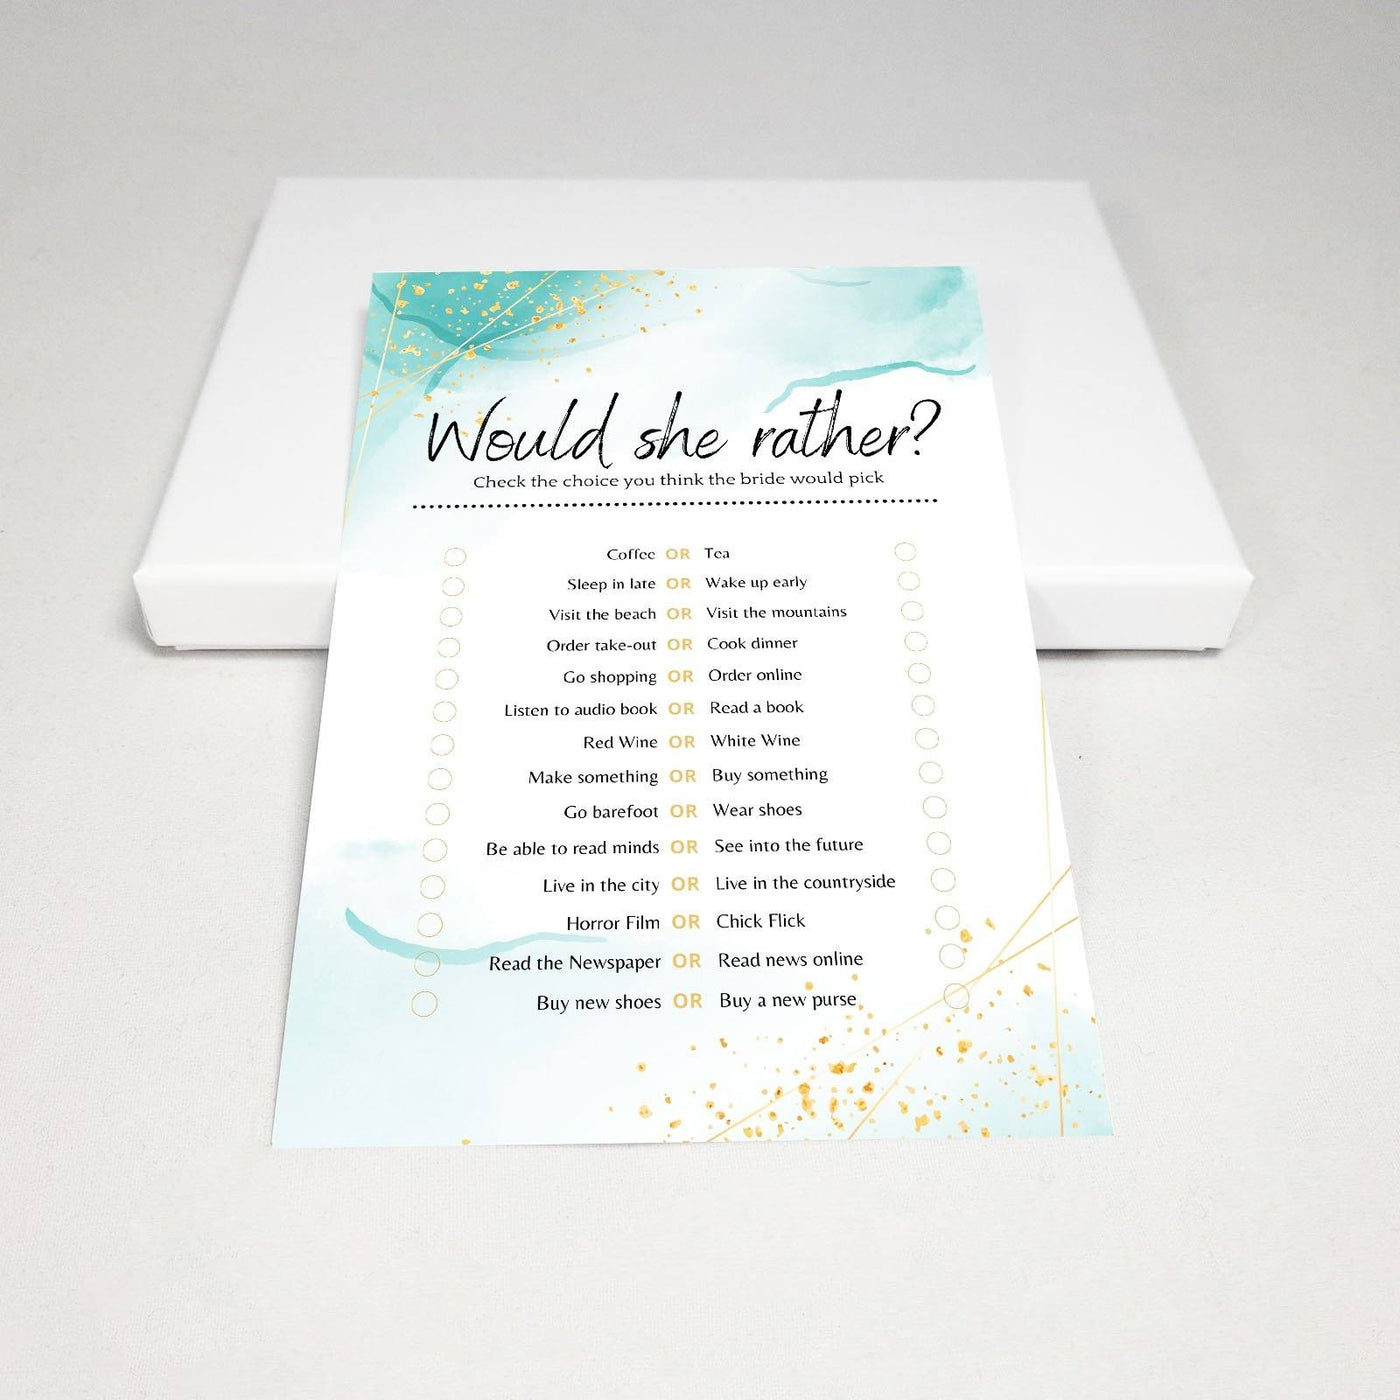 Ocean Gold - Would She Rather? | Bridal Shower Game Party Games Your Party Games 